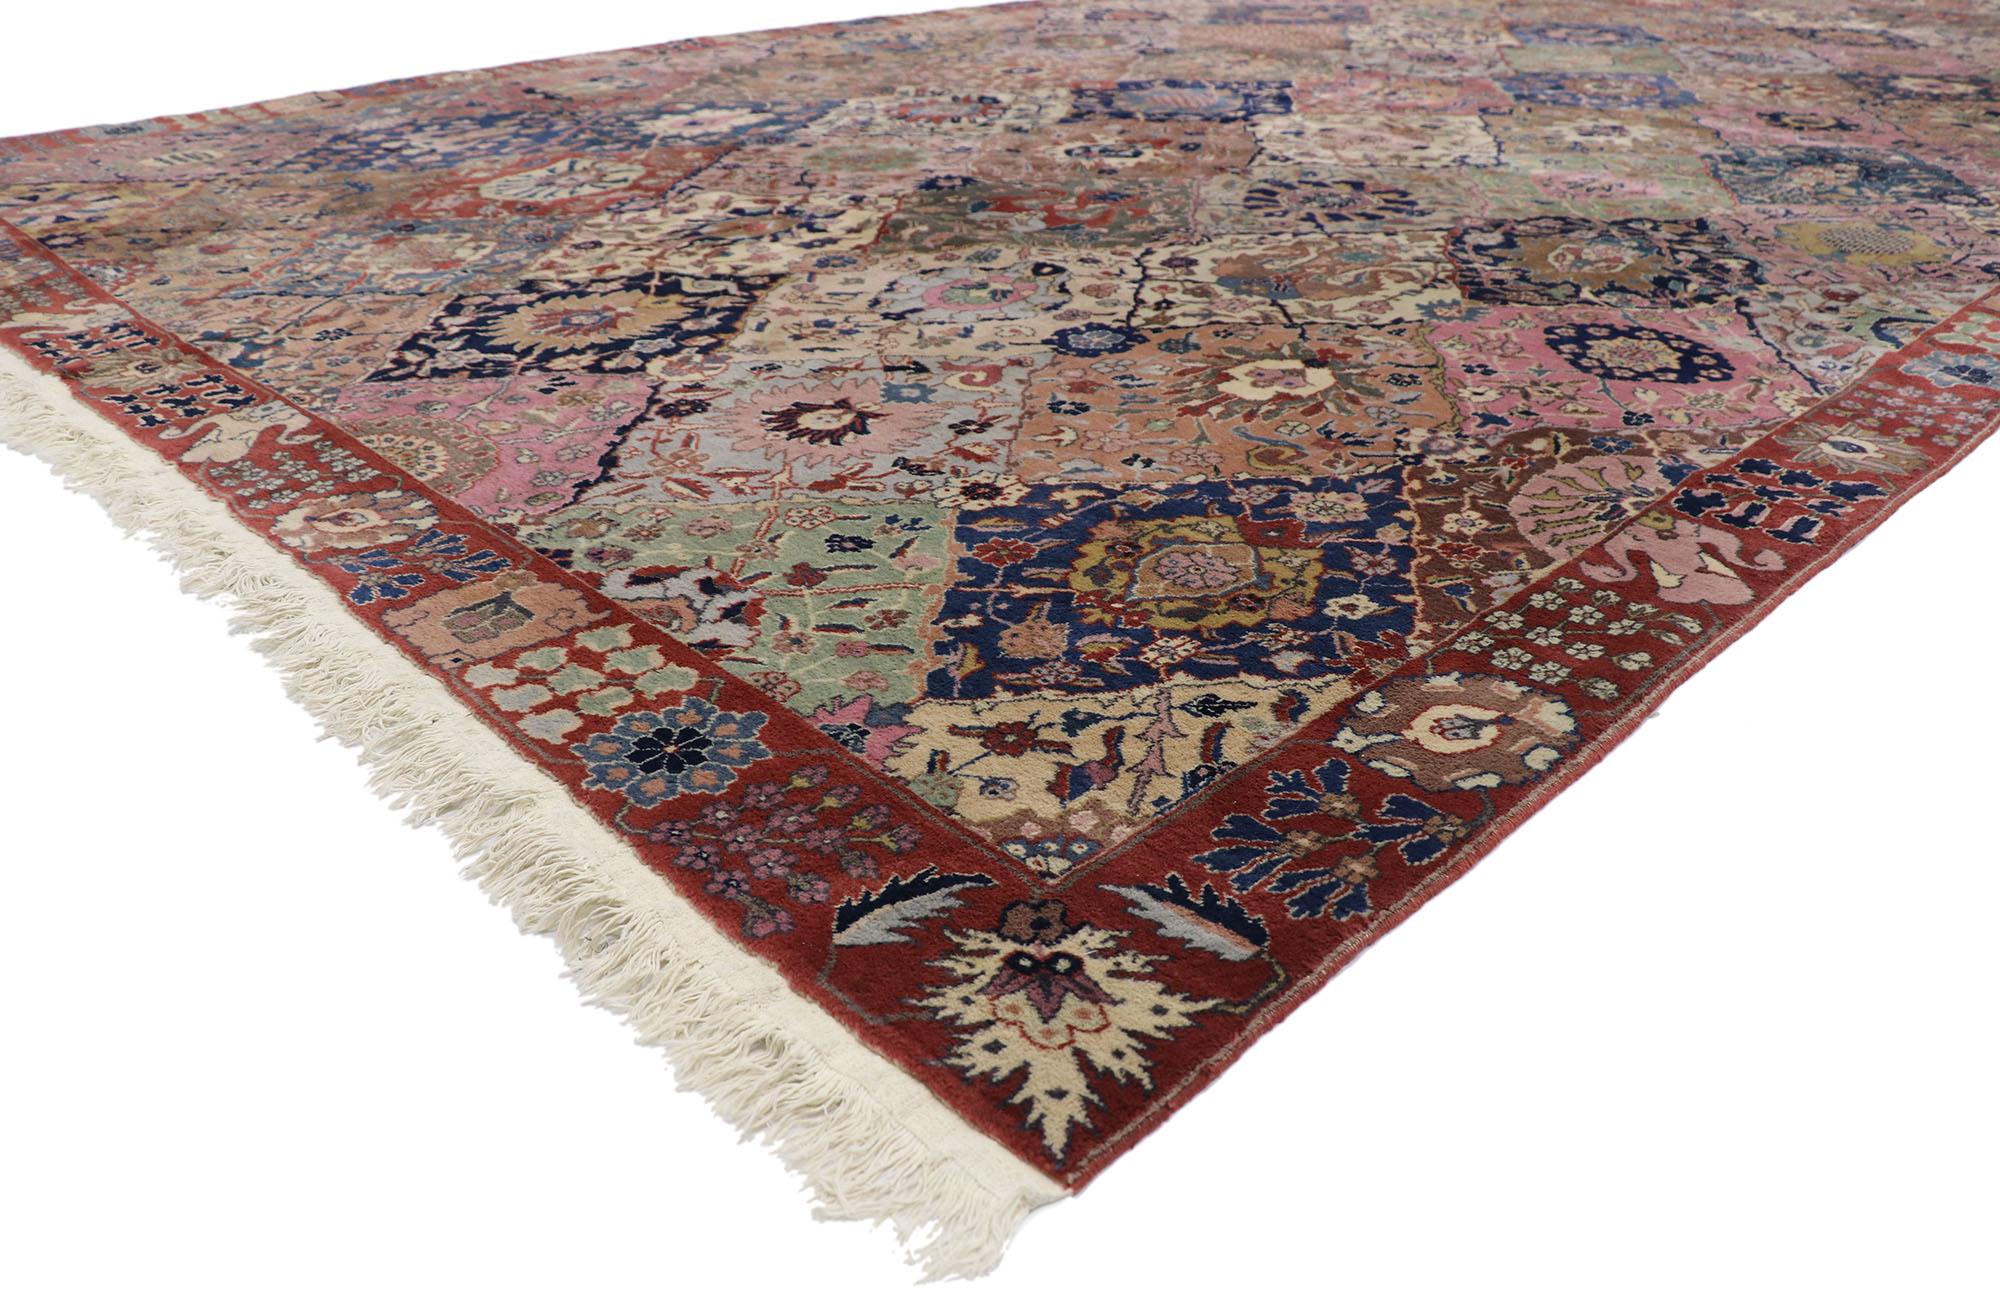 77790 Antique Indian Garden Panel Agra rug with Victorian Style 09'08 x 28'05. Cleverly composed and distinctively well-balanced, this hand knotted wool antique Indian garden panel Agra rug will take on a curated lived-in look that feels timeless